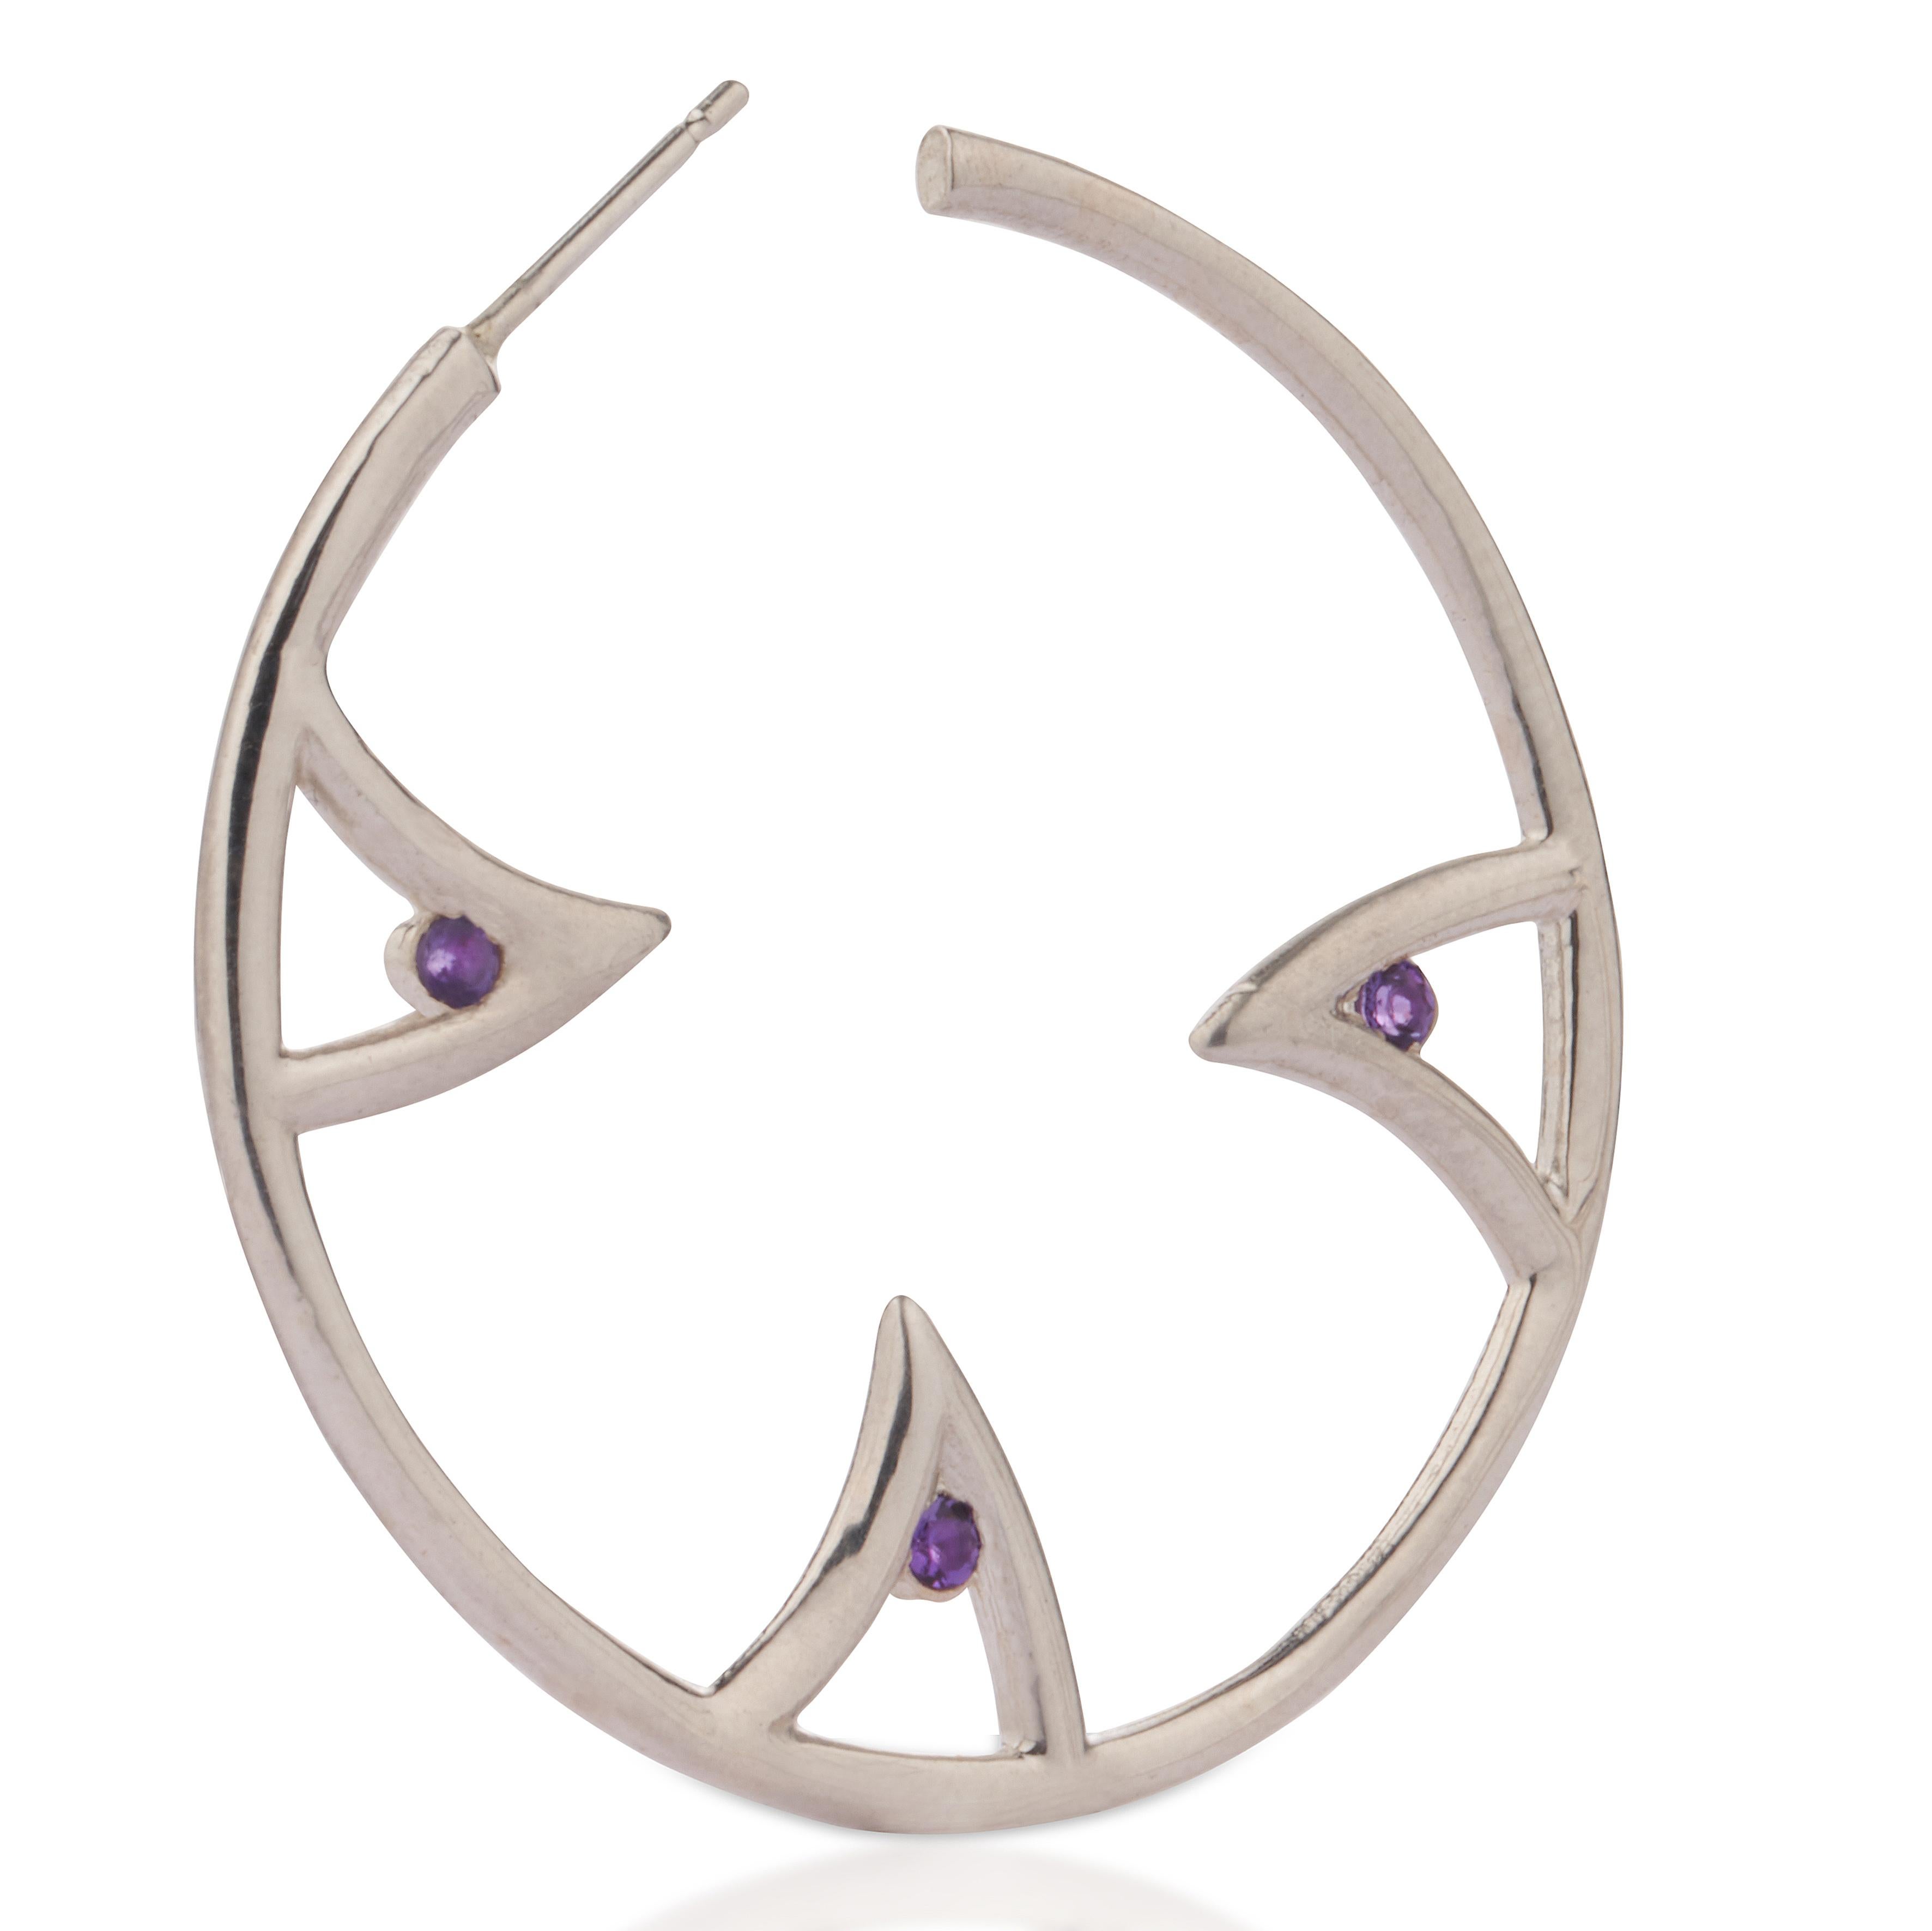 A pair of hoop earrings in polished sterling silver, set with 6 amethyst stones. A playful alternative to the traditional hoop earrings, with a boho-chic twist. 
Seen on Sibley Scoles.
Gemstones: 3 amethyst stones per earring (2.20 mm round, 0.36